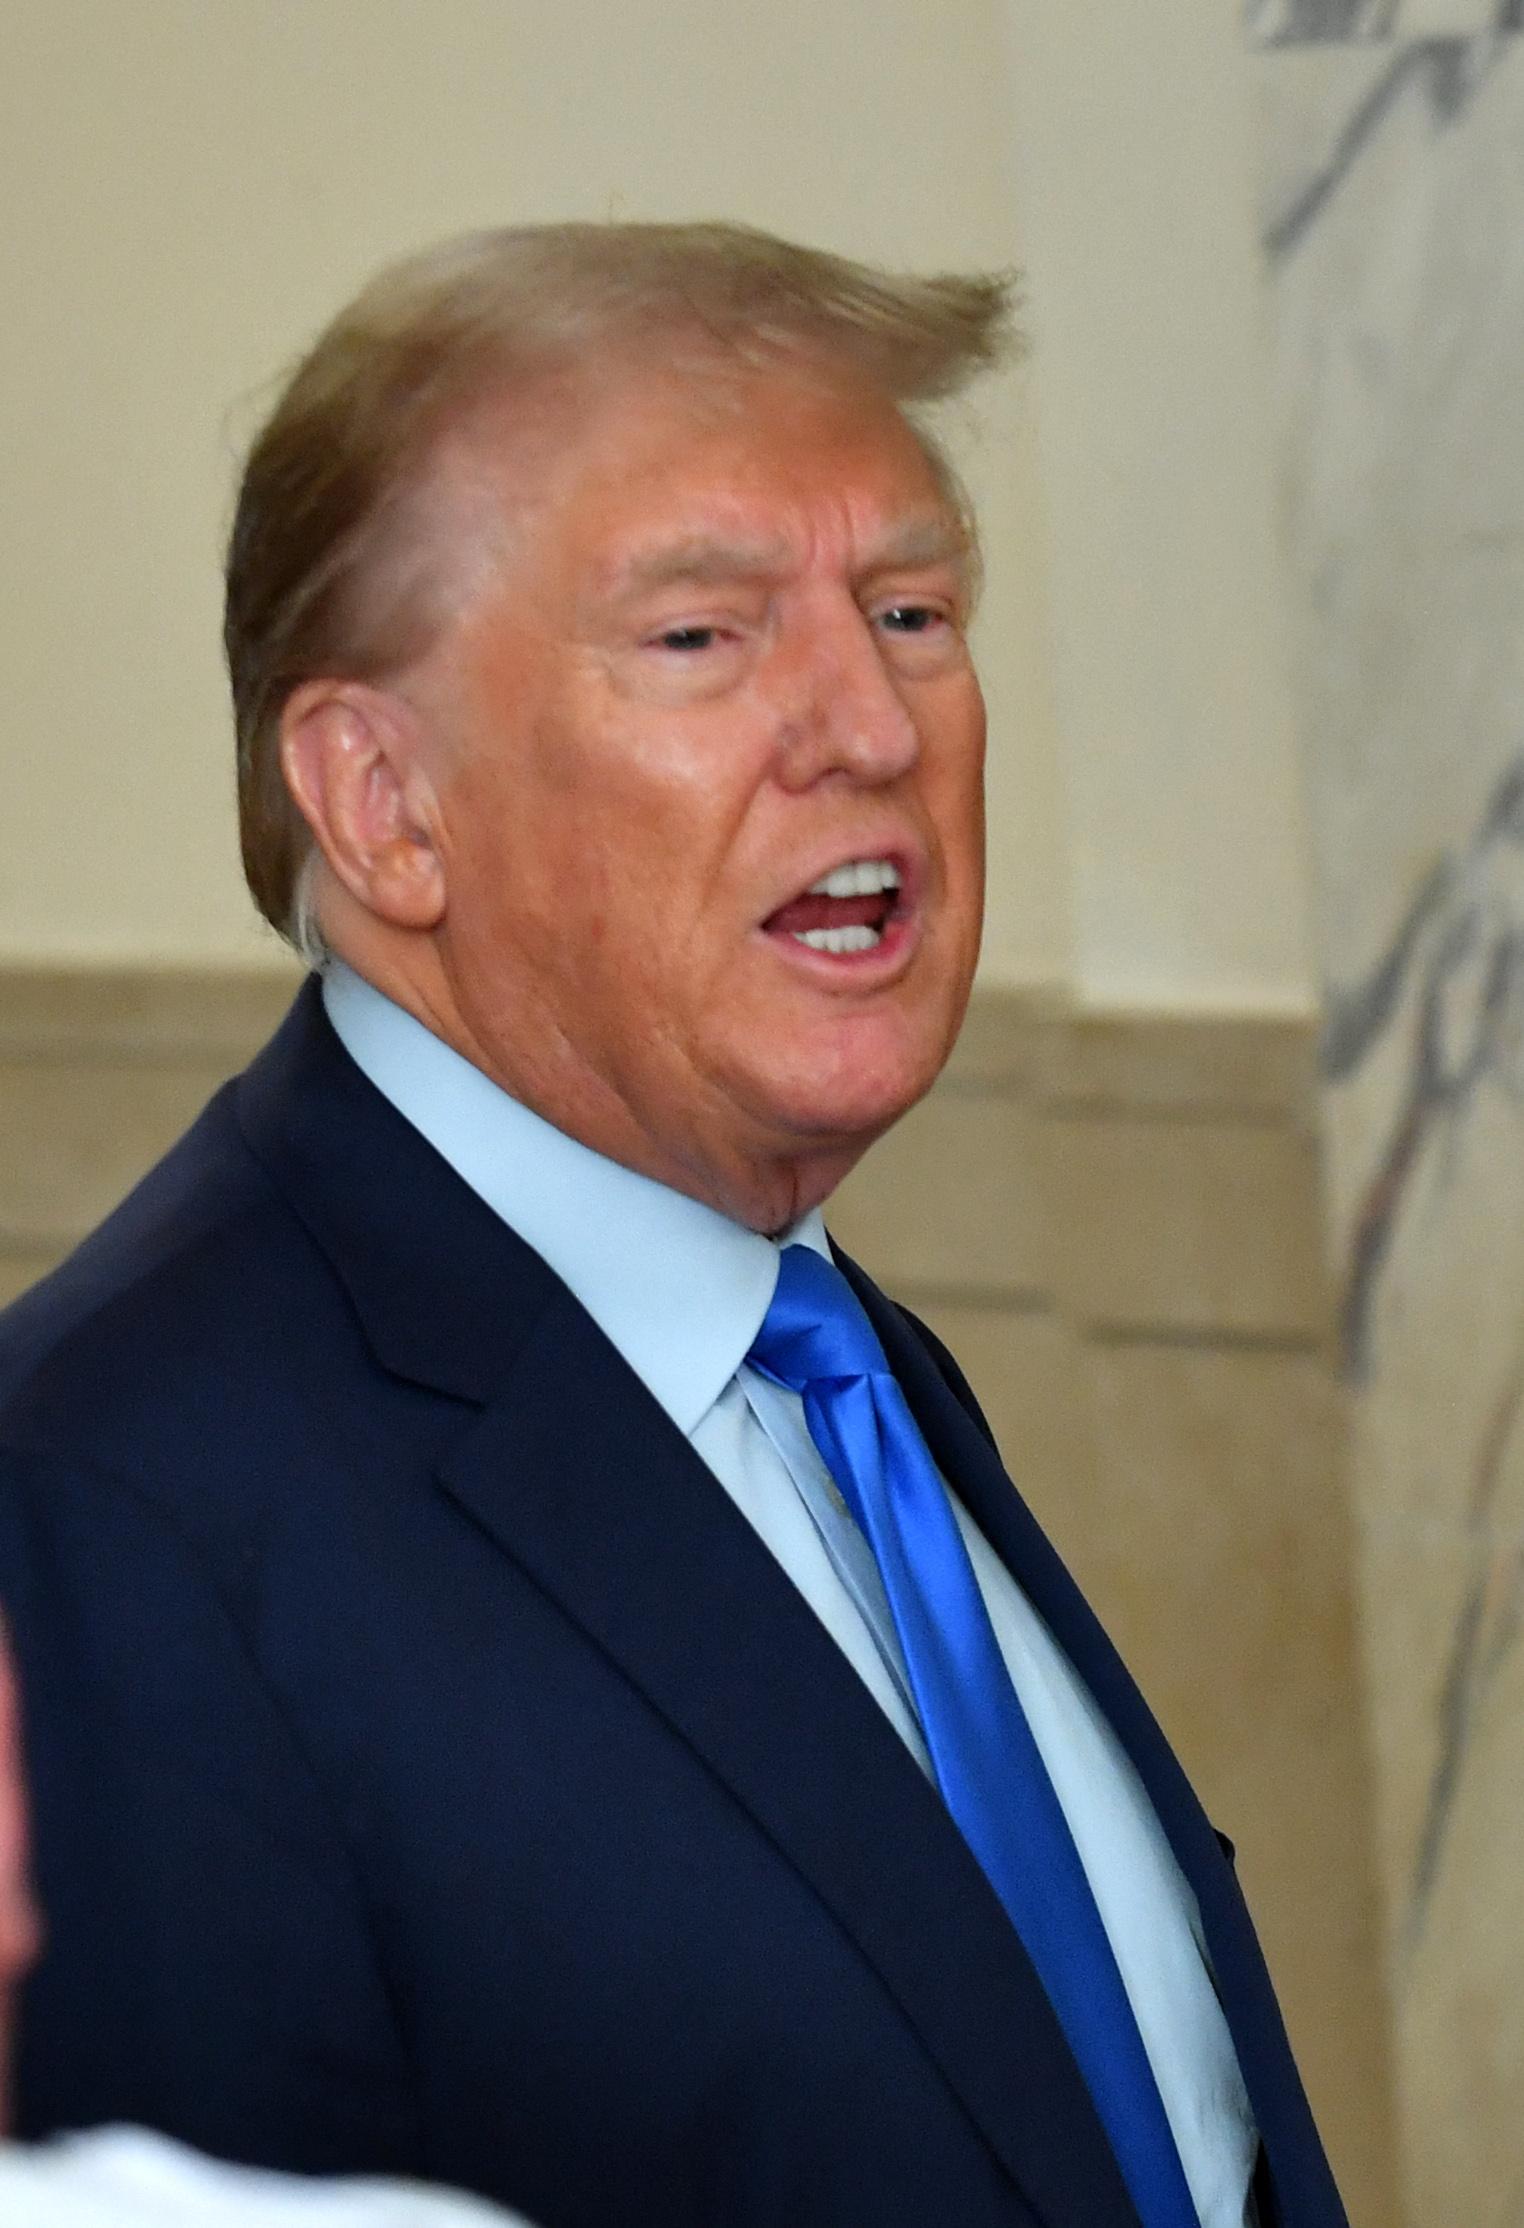 Donald Trump Unbothered By His Name In Jeffrey Epstein Docs